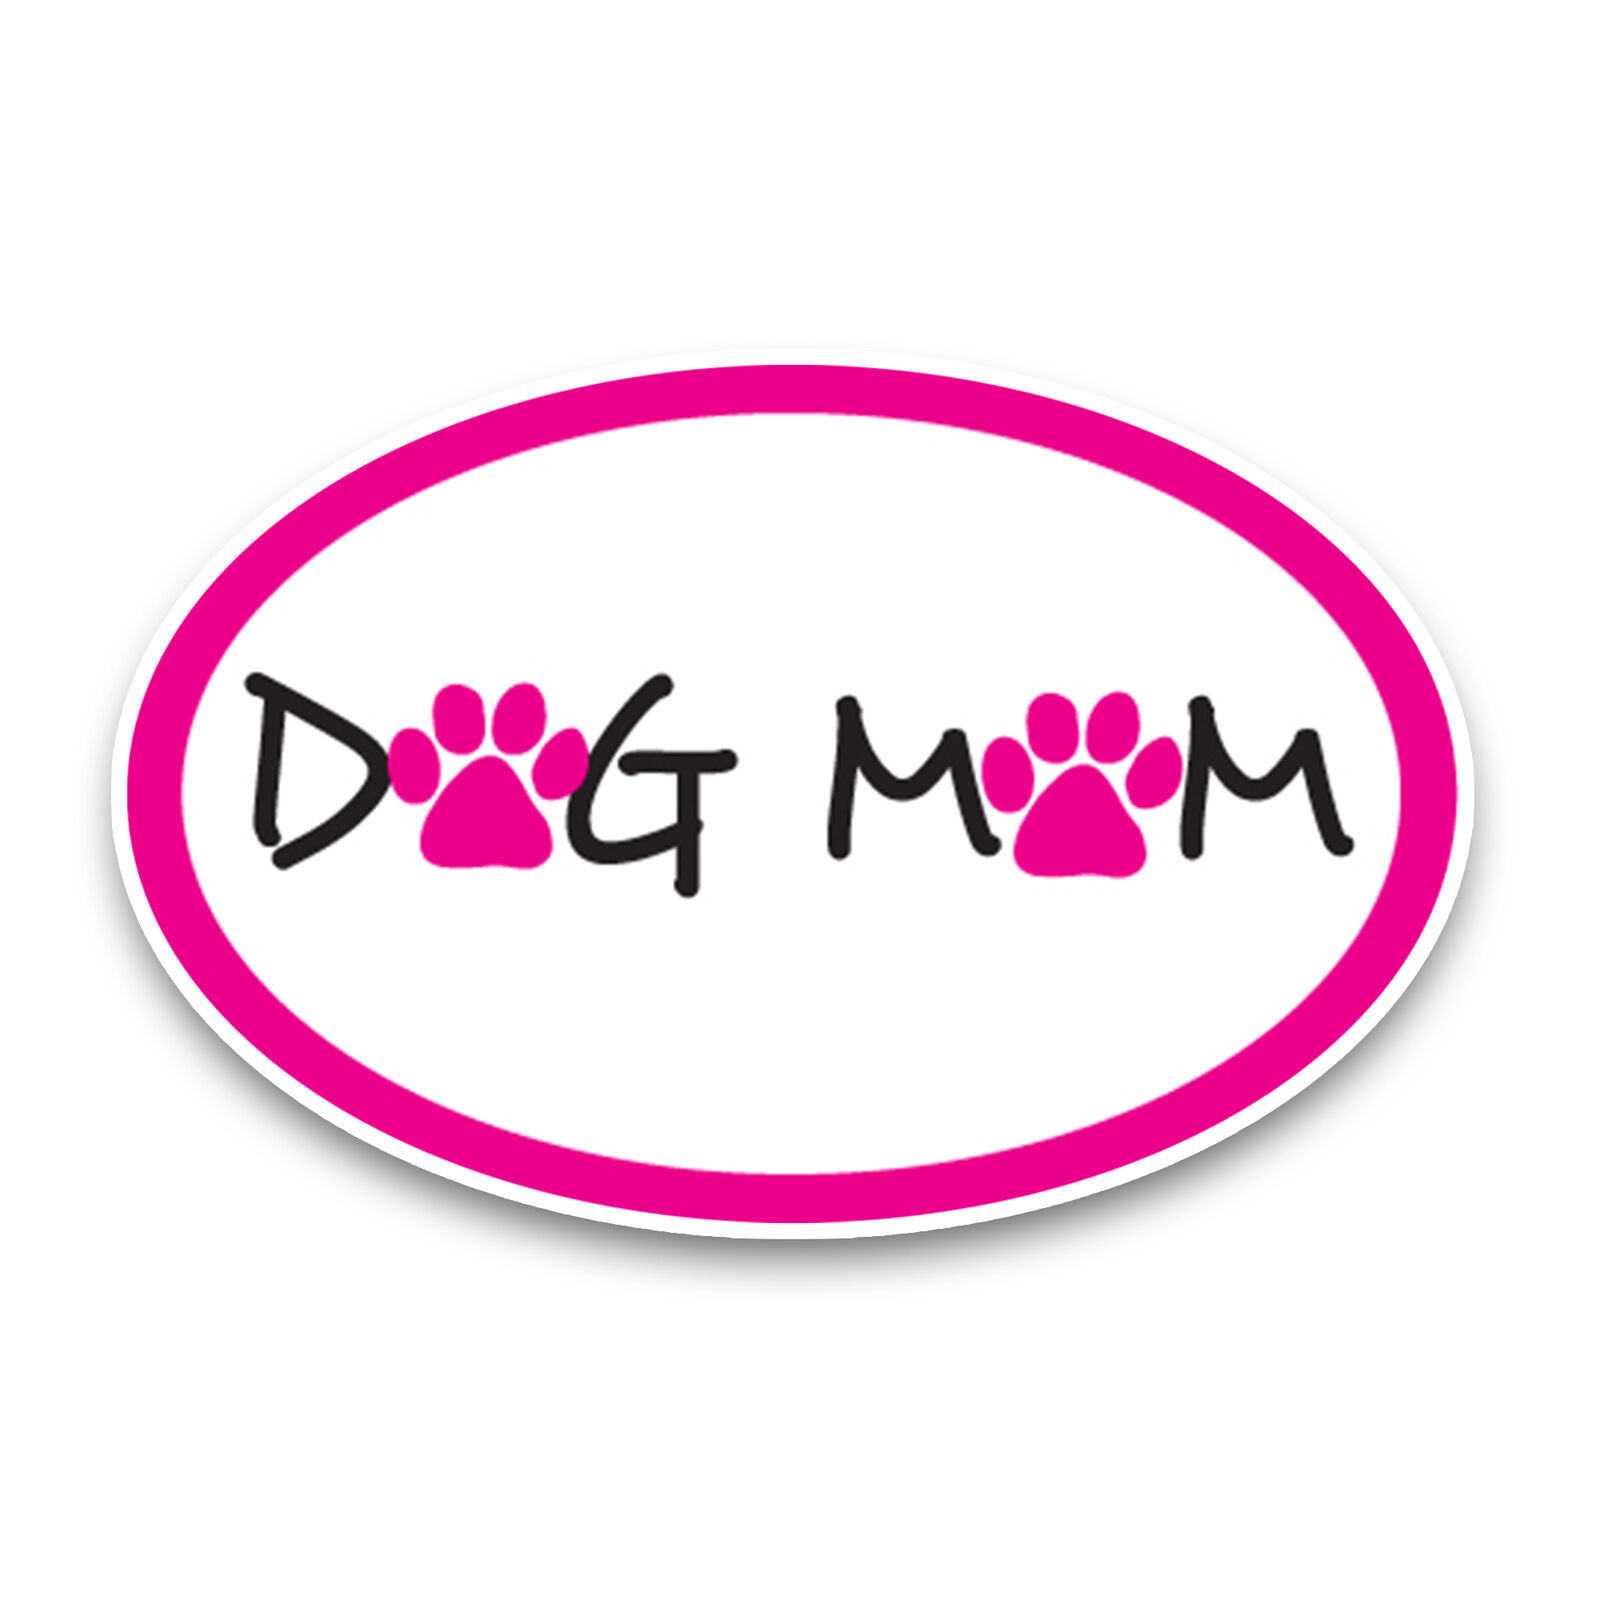 Dog Mom Pink Oval Magnet Decal, 4x6 Inches, Automotive Magnet